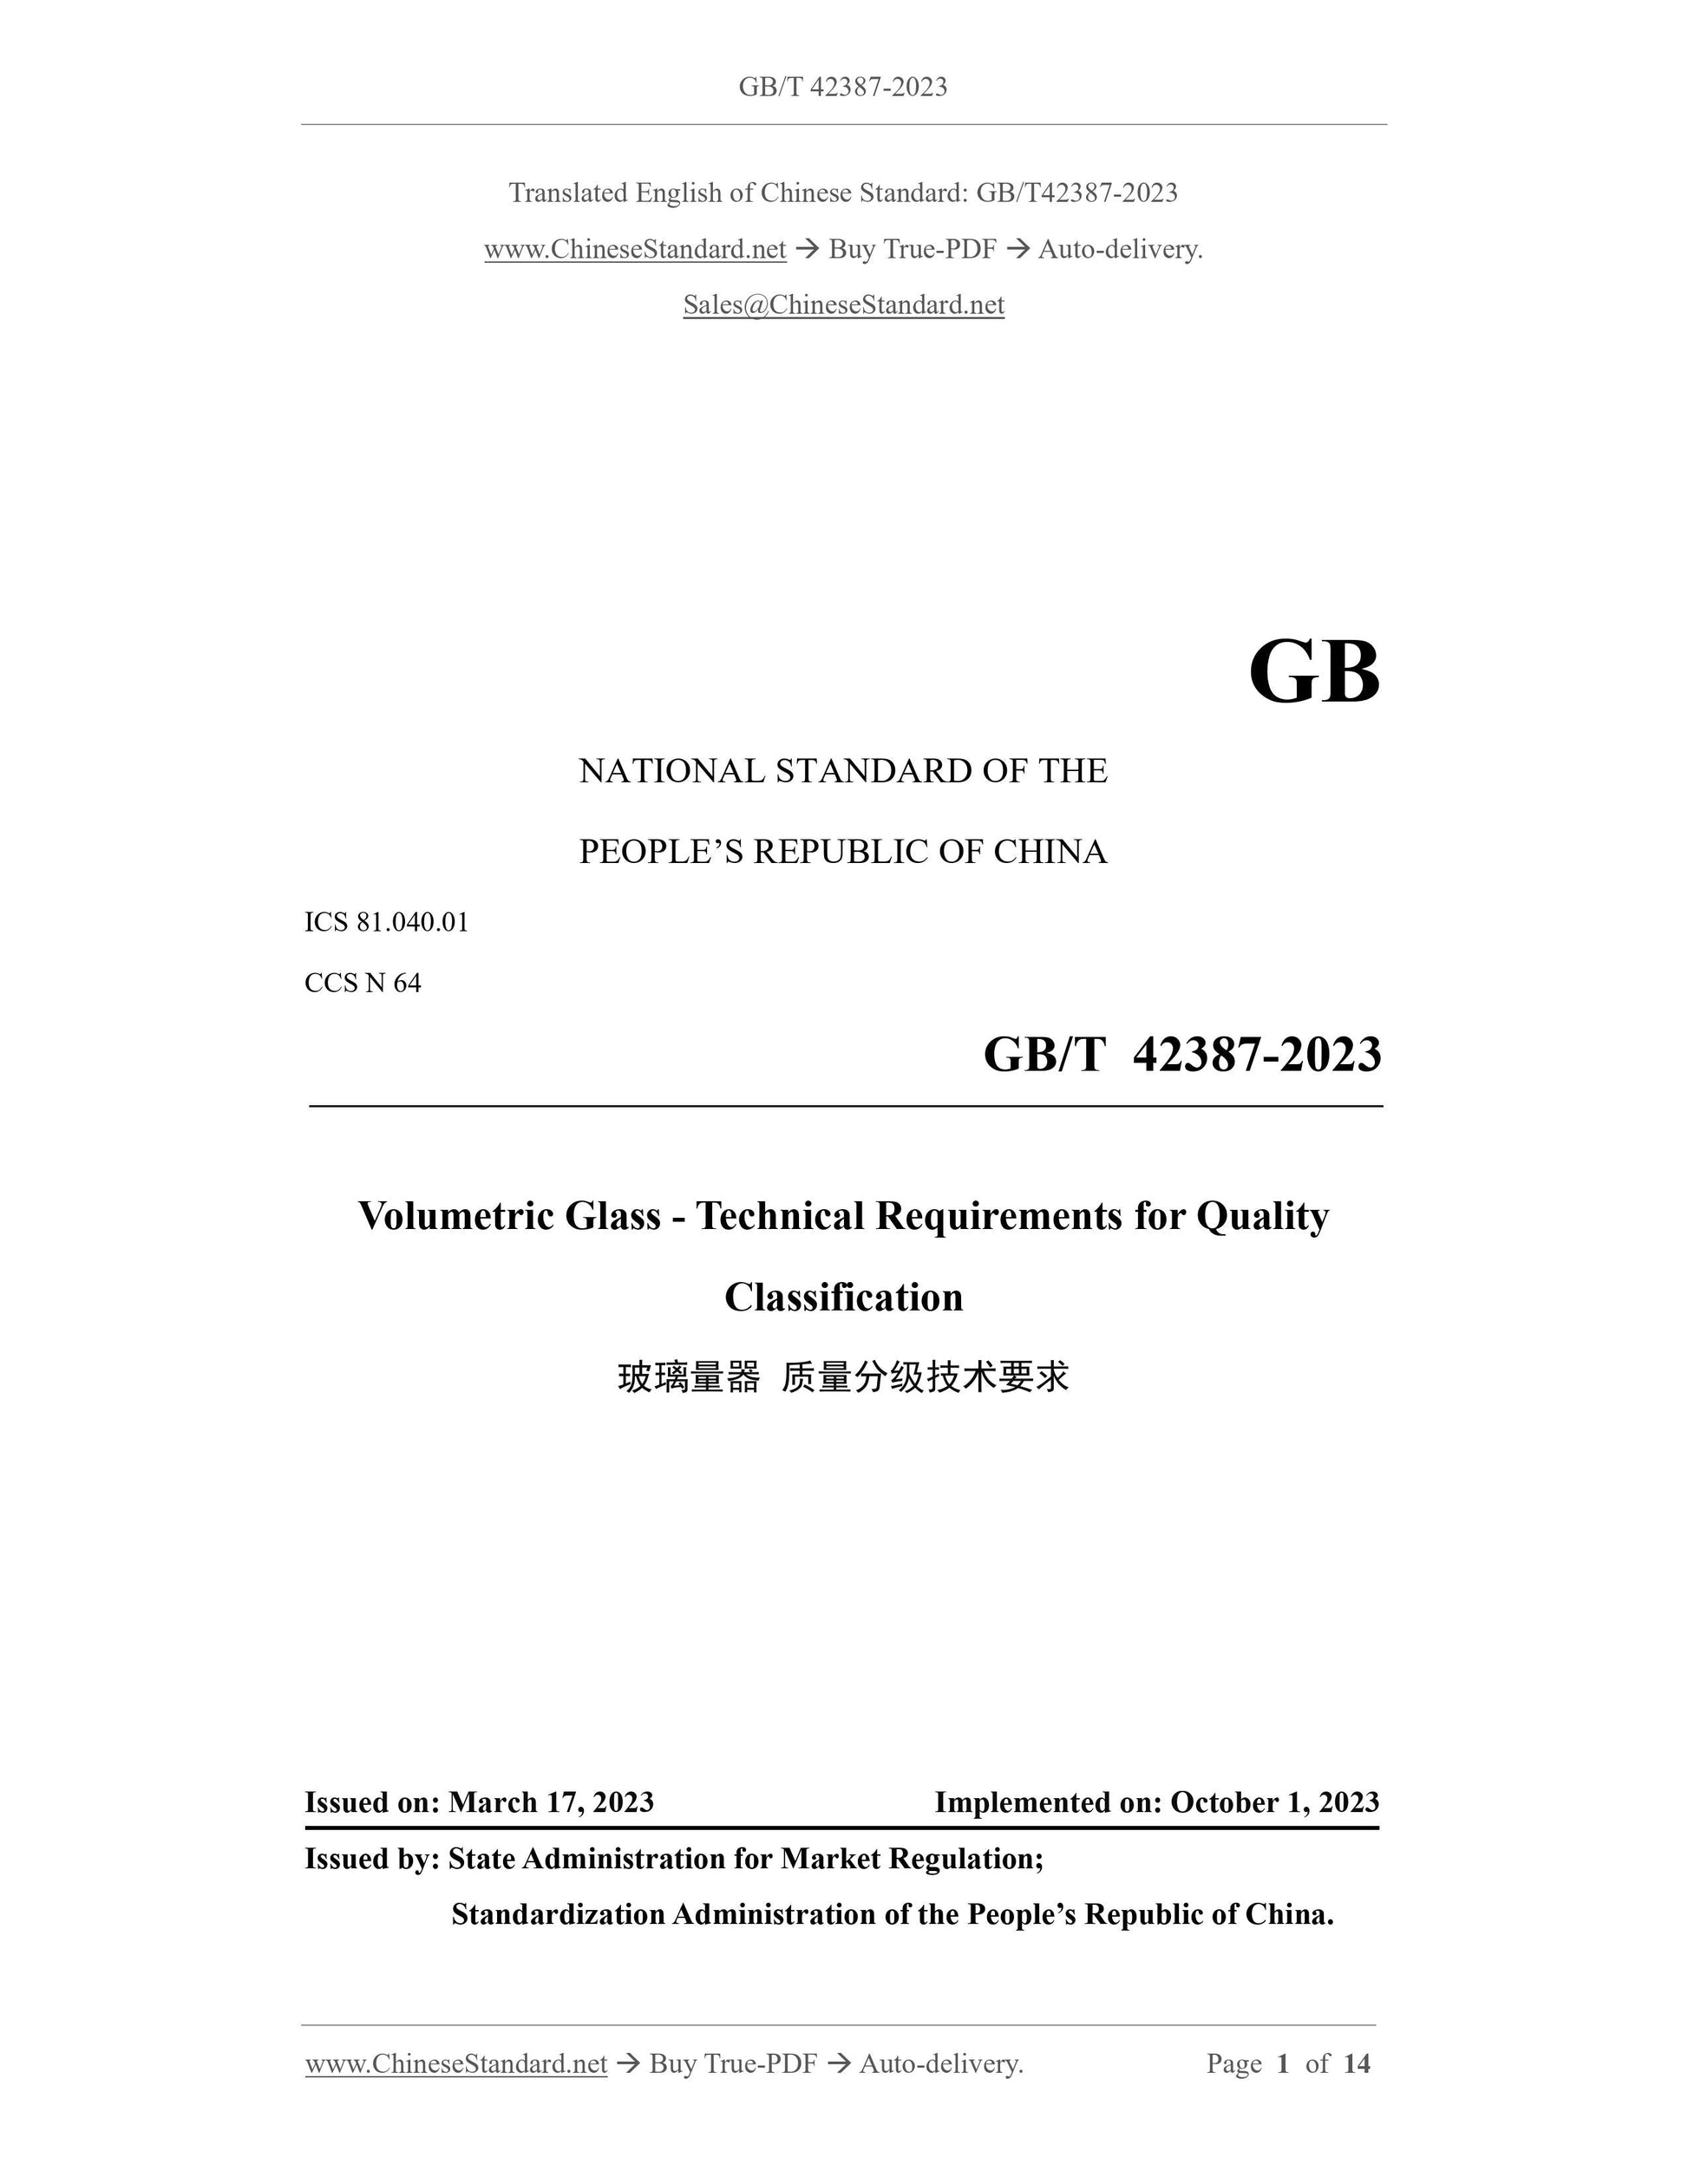 GB/T 42387-2023 Page 1